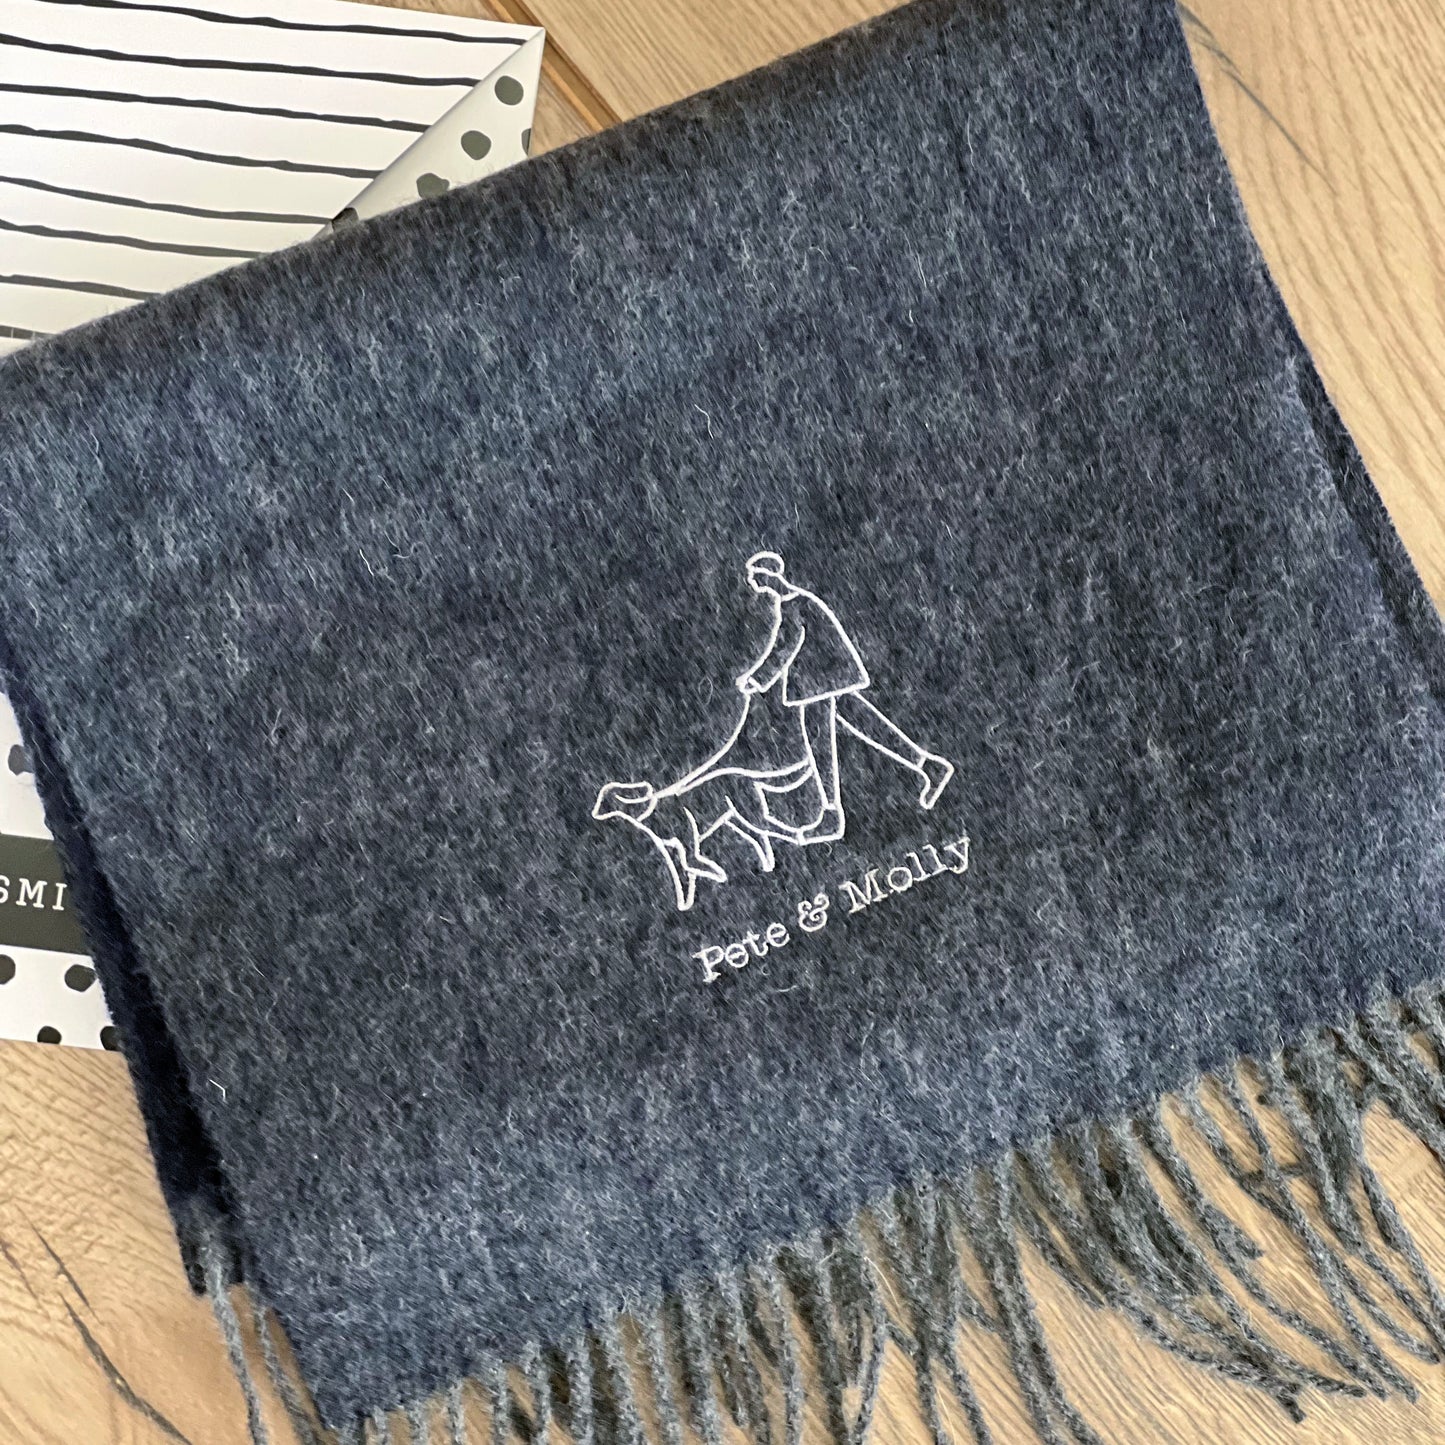 Dog and Owner Embroidered Scarf